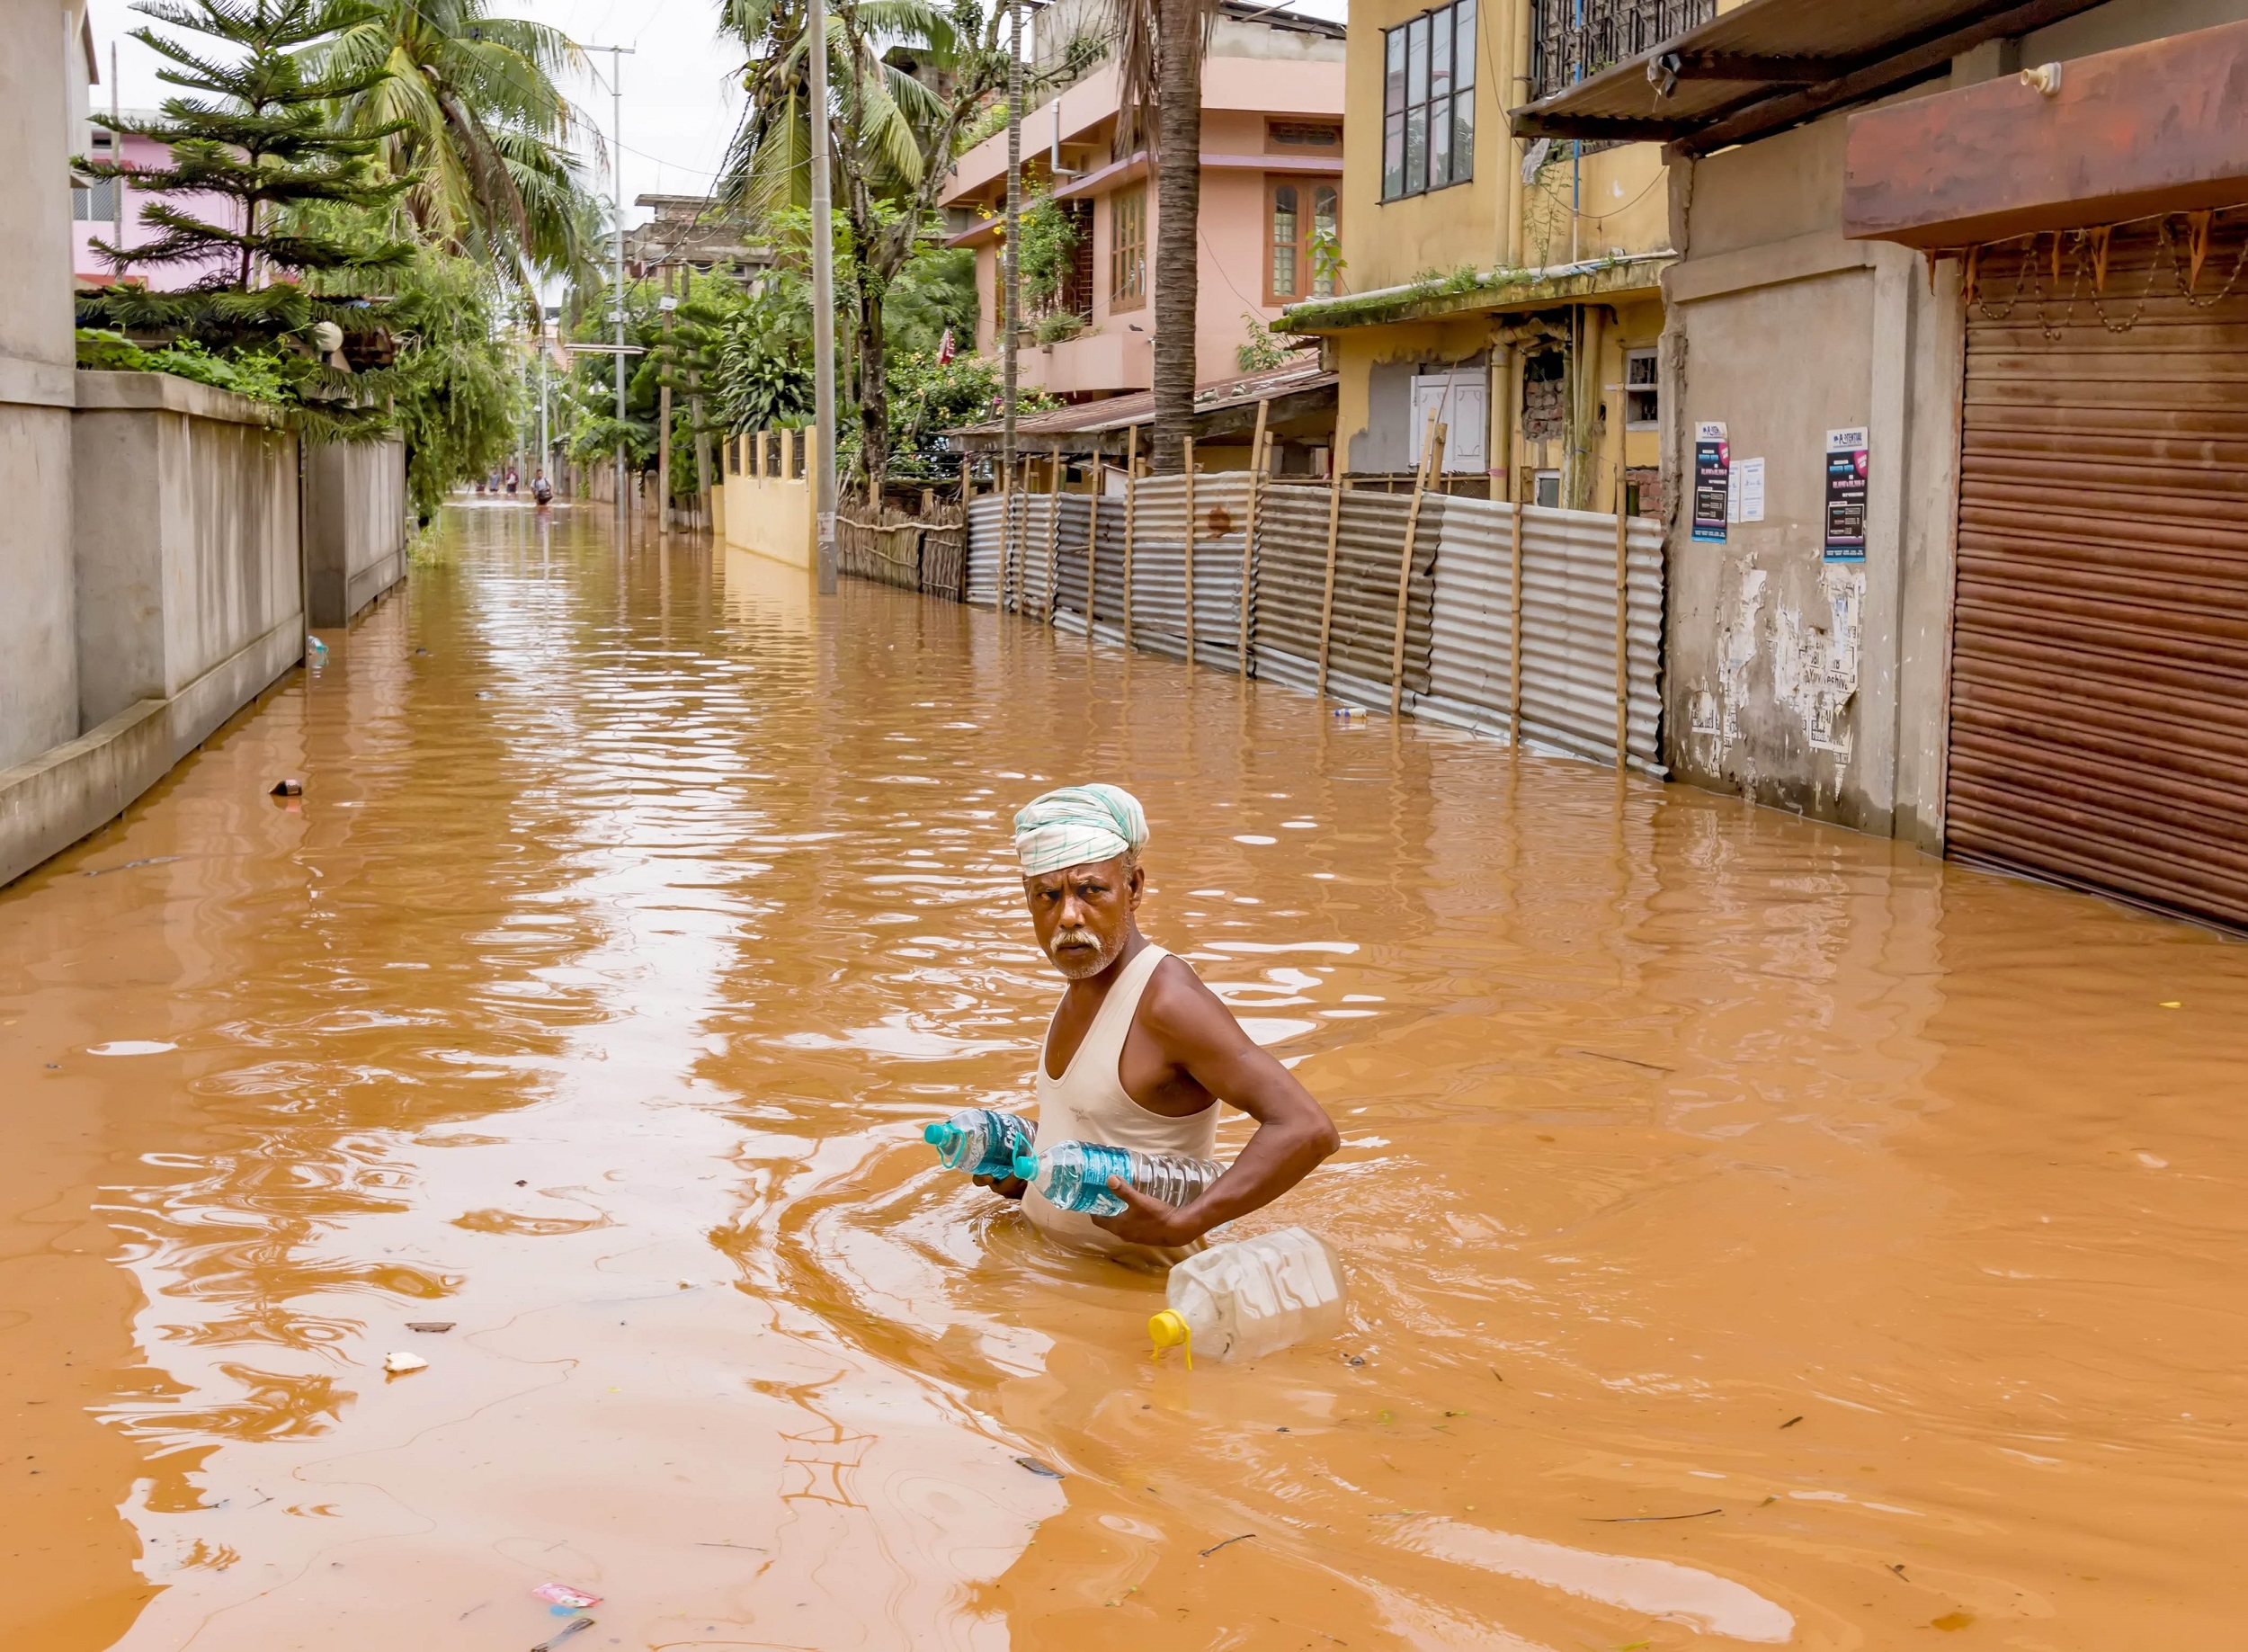 <p>An man carries bottles of drinking water to his home, which were provided by the relief team during flooding on July 7, 2016 at Anil Nagar, Guwahati [image: Vikramjit Kakati India/ZUMA Wire/Alamy Live News]</p>